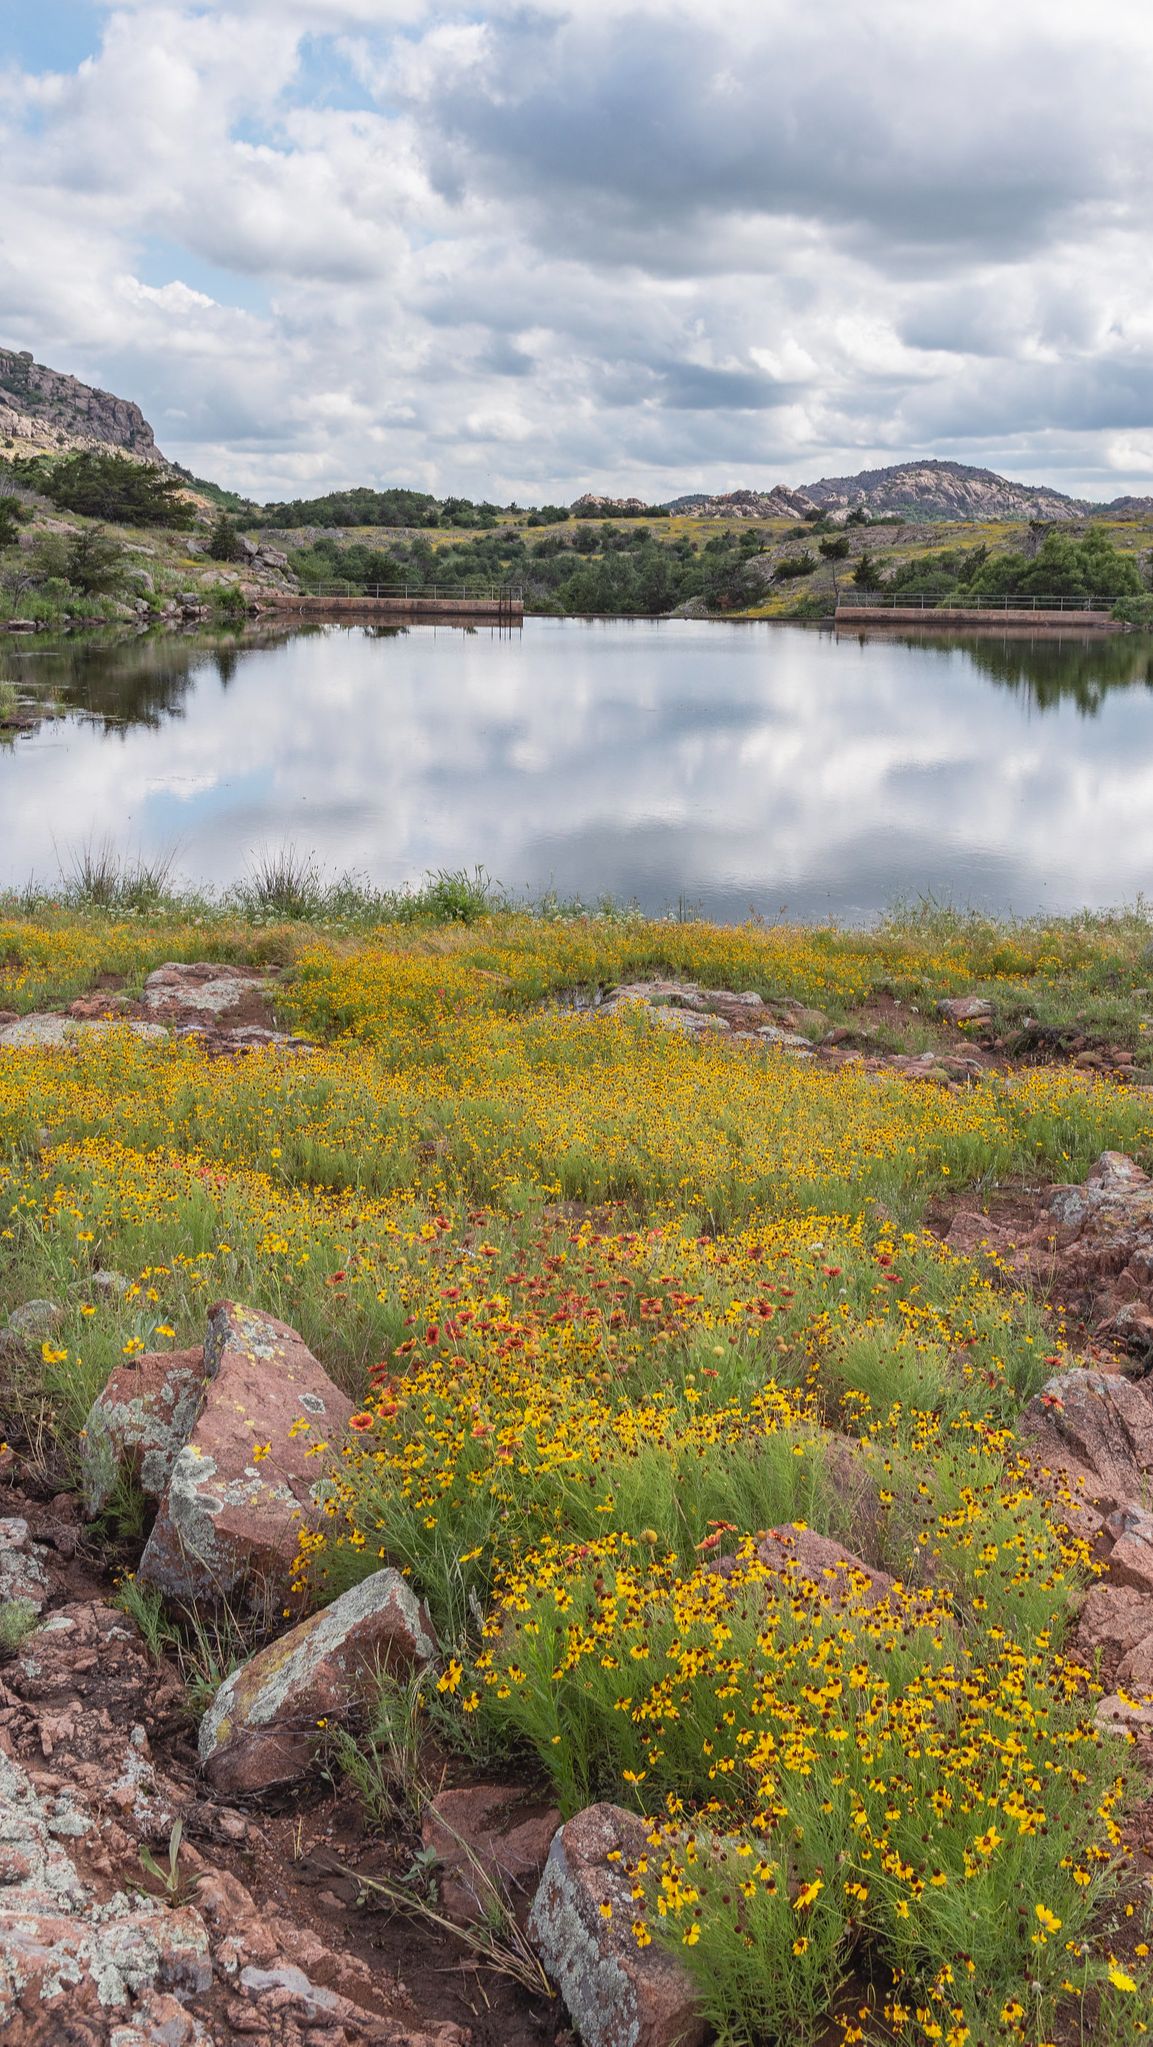 1. Wichita Mountains Wildlife Refuge: Roaming in Nature's Majesty<br /><br
/>The Wichita Mountains Wildlife Refuge is a true haven for nature lovers. It is located in southwestern Oklahoma. It spans over 59,000 acres. The shelter offers a spectacular blend of wild mountains, peaceful lakes, and leafy grasslands.<br
/><br
/>flickr/Lori Elfers